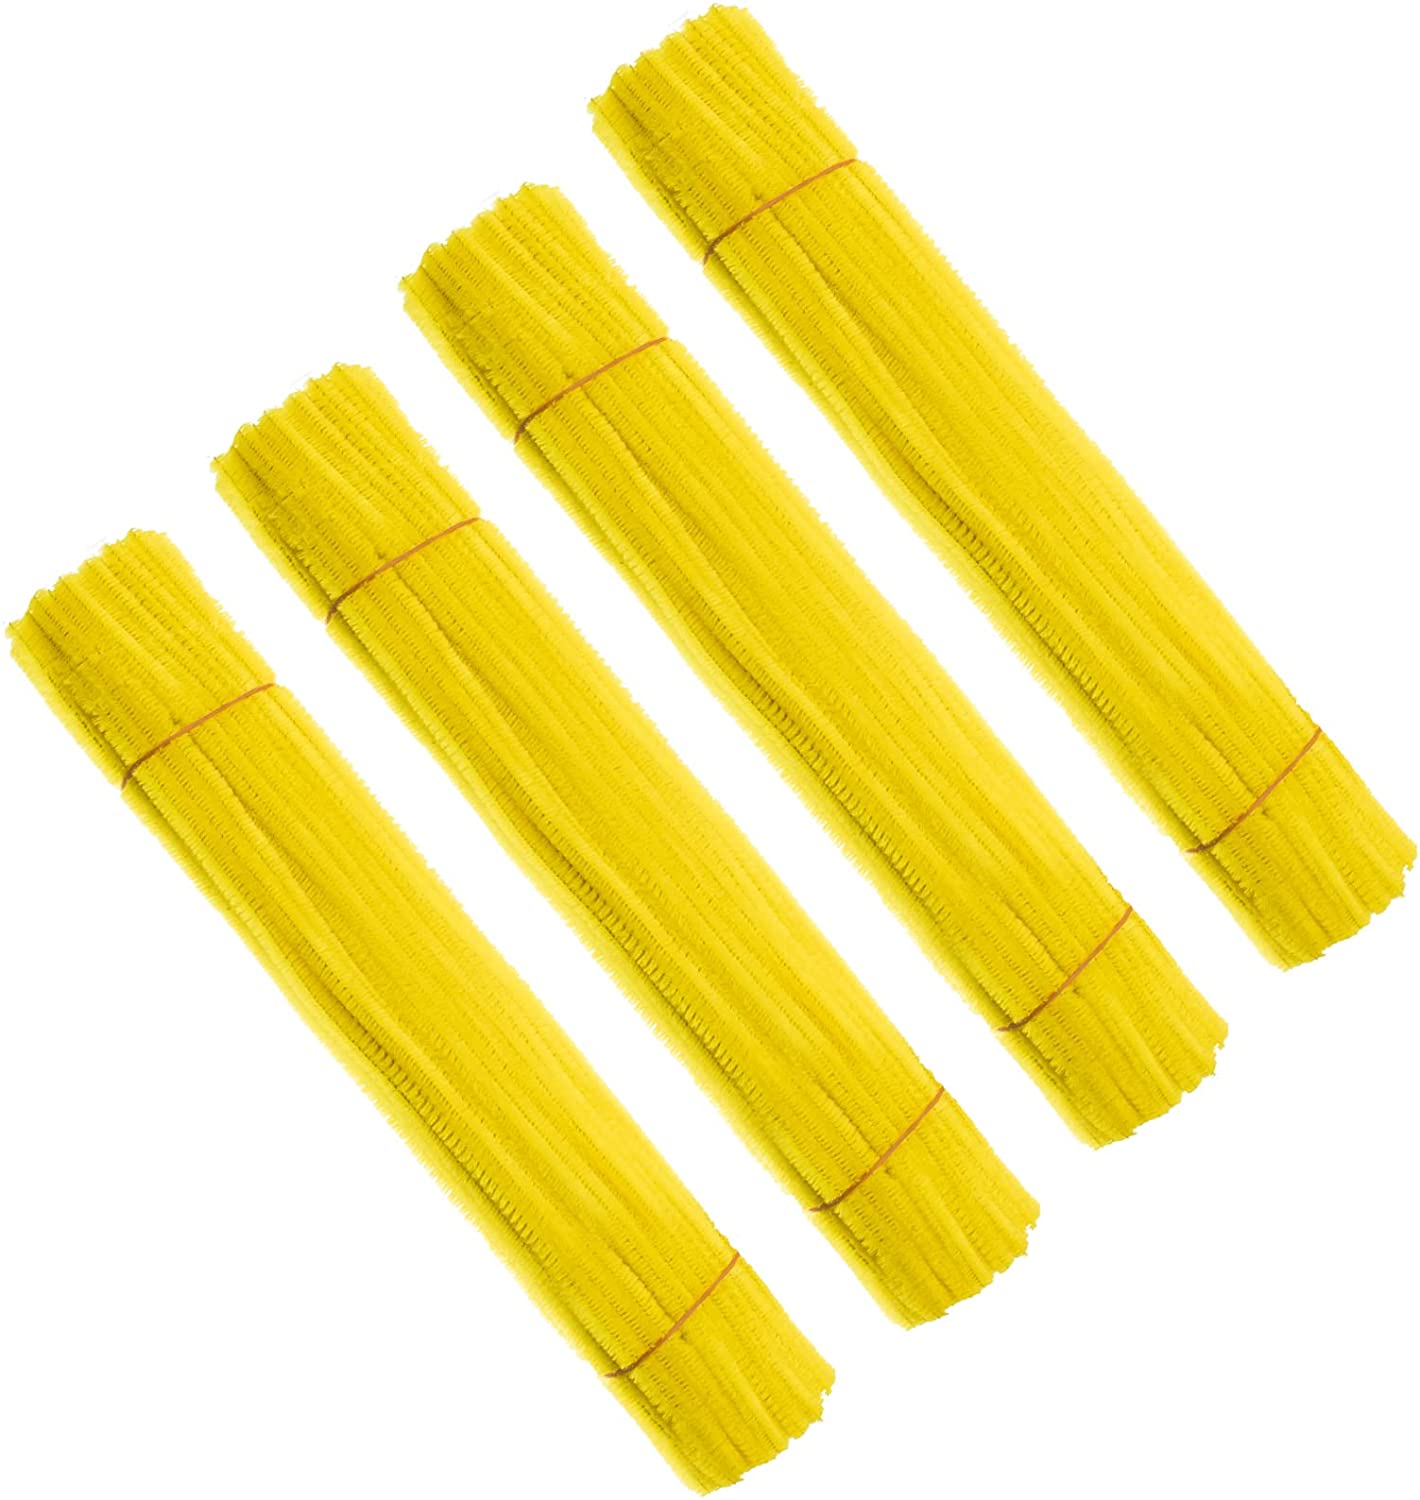 400pcs Yellow Pipe Cleaners Chenille Stem, Pipe Cleaners Craft Supplies,  for DIY, Making Toys, Creative Home Art Craft Decorations (6mm x 12 Inch)